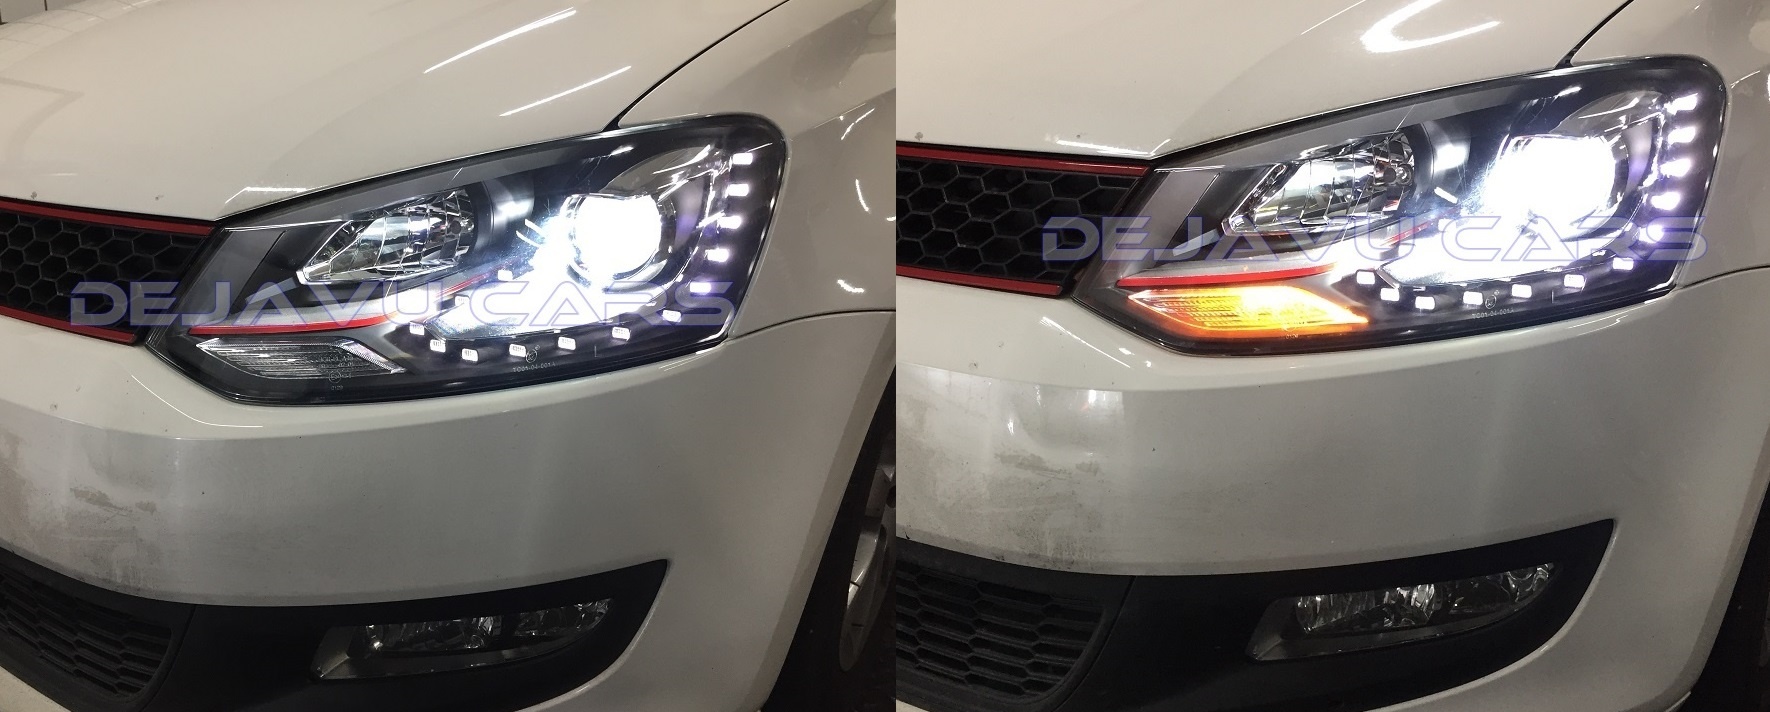 Featured image of post Vw Polo Xenon Headlights Ok you say polo 2019 xenon lights but you have failure yes as you can see in the picture the headlights are not working do you think that is because of the led light because i dont have low beam hi beam blinkers nothing works can that be a bad coding